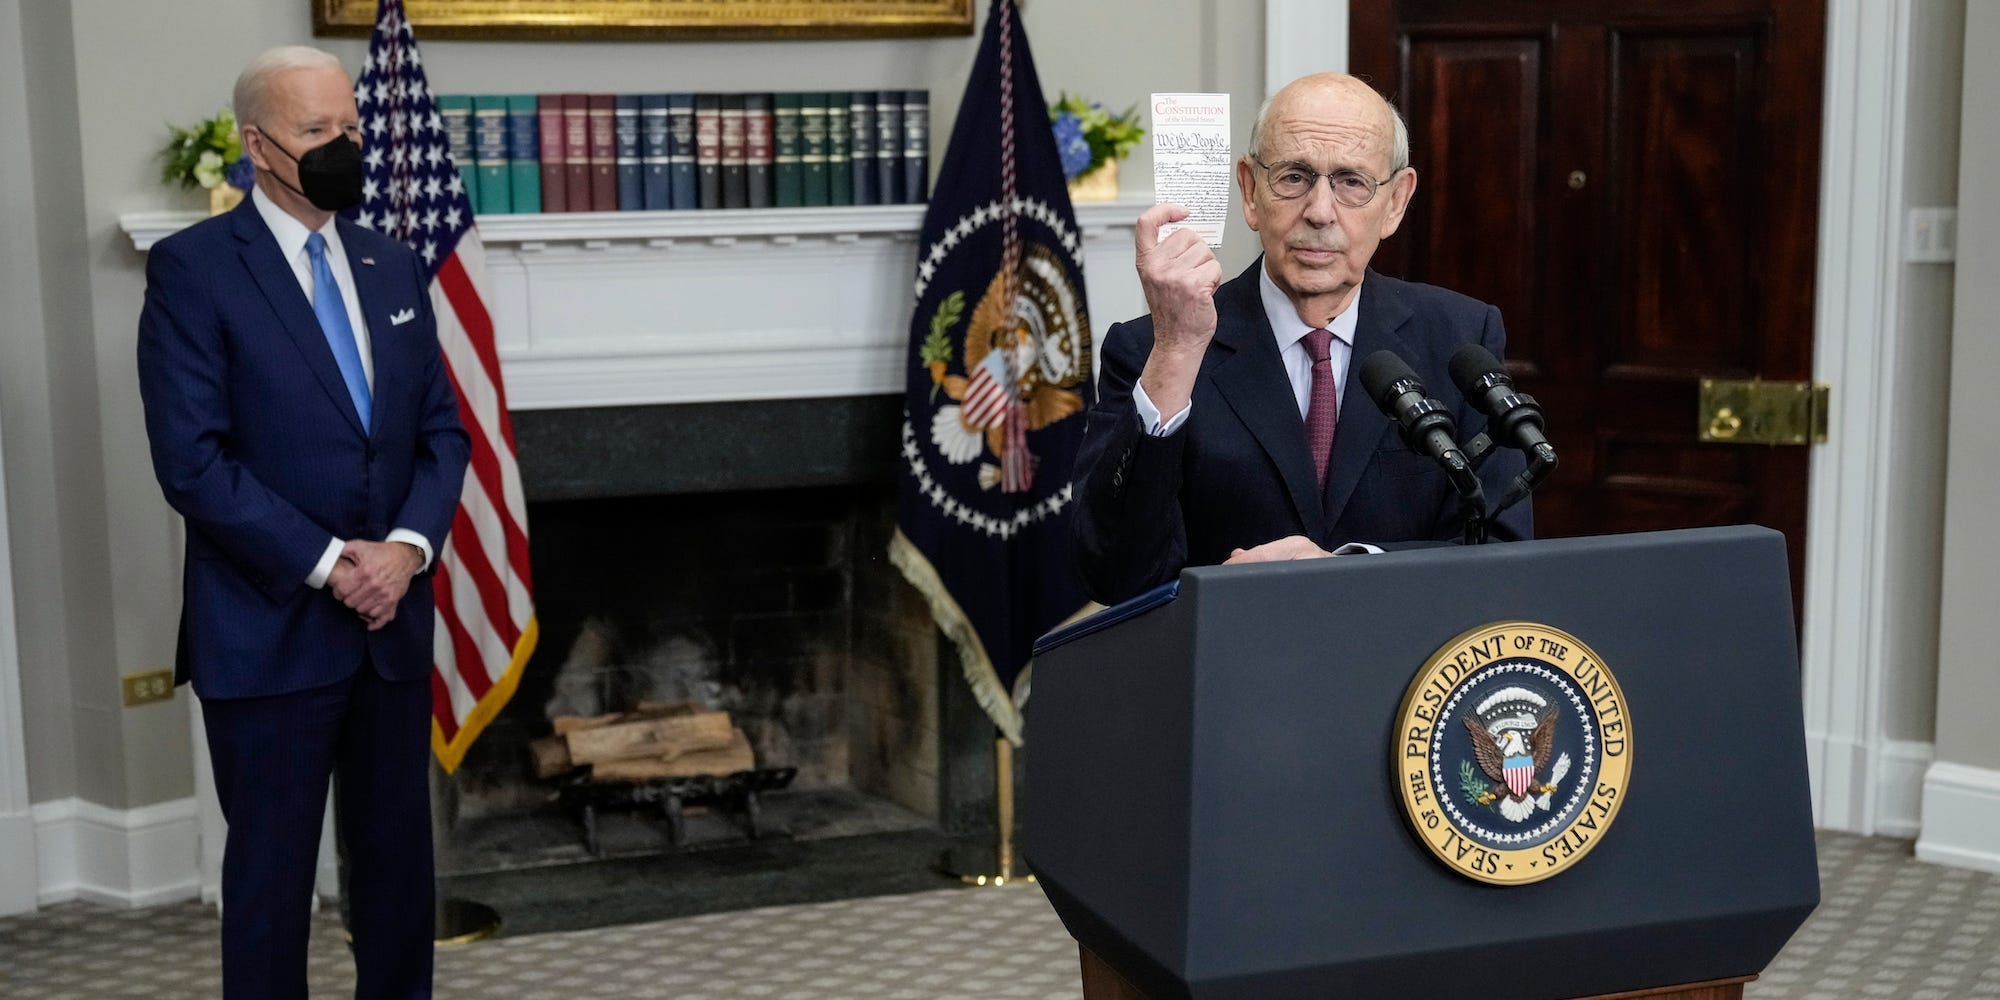 U.S. President Joe Biden looks on as U.S. Supreme Court Associate Justice Stephen Breyer holds up a pocket Constitution and speaks about his coming retirement in the Roosevelt Room of the White House on January 27, 2022 in